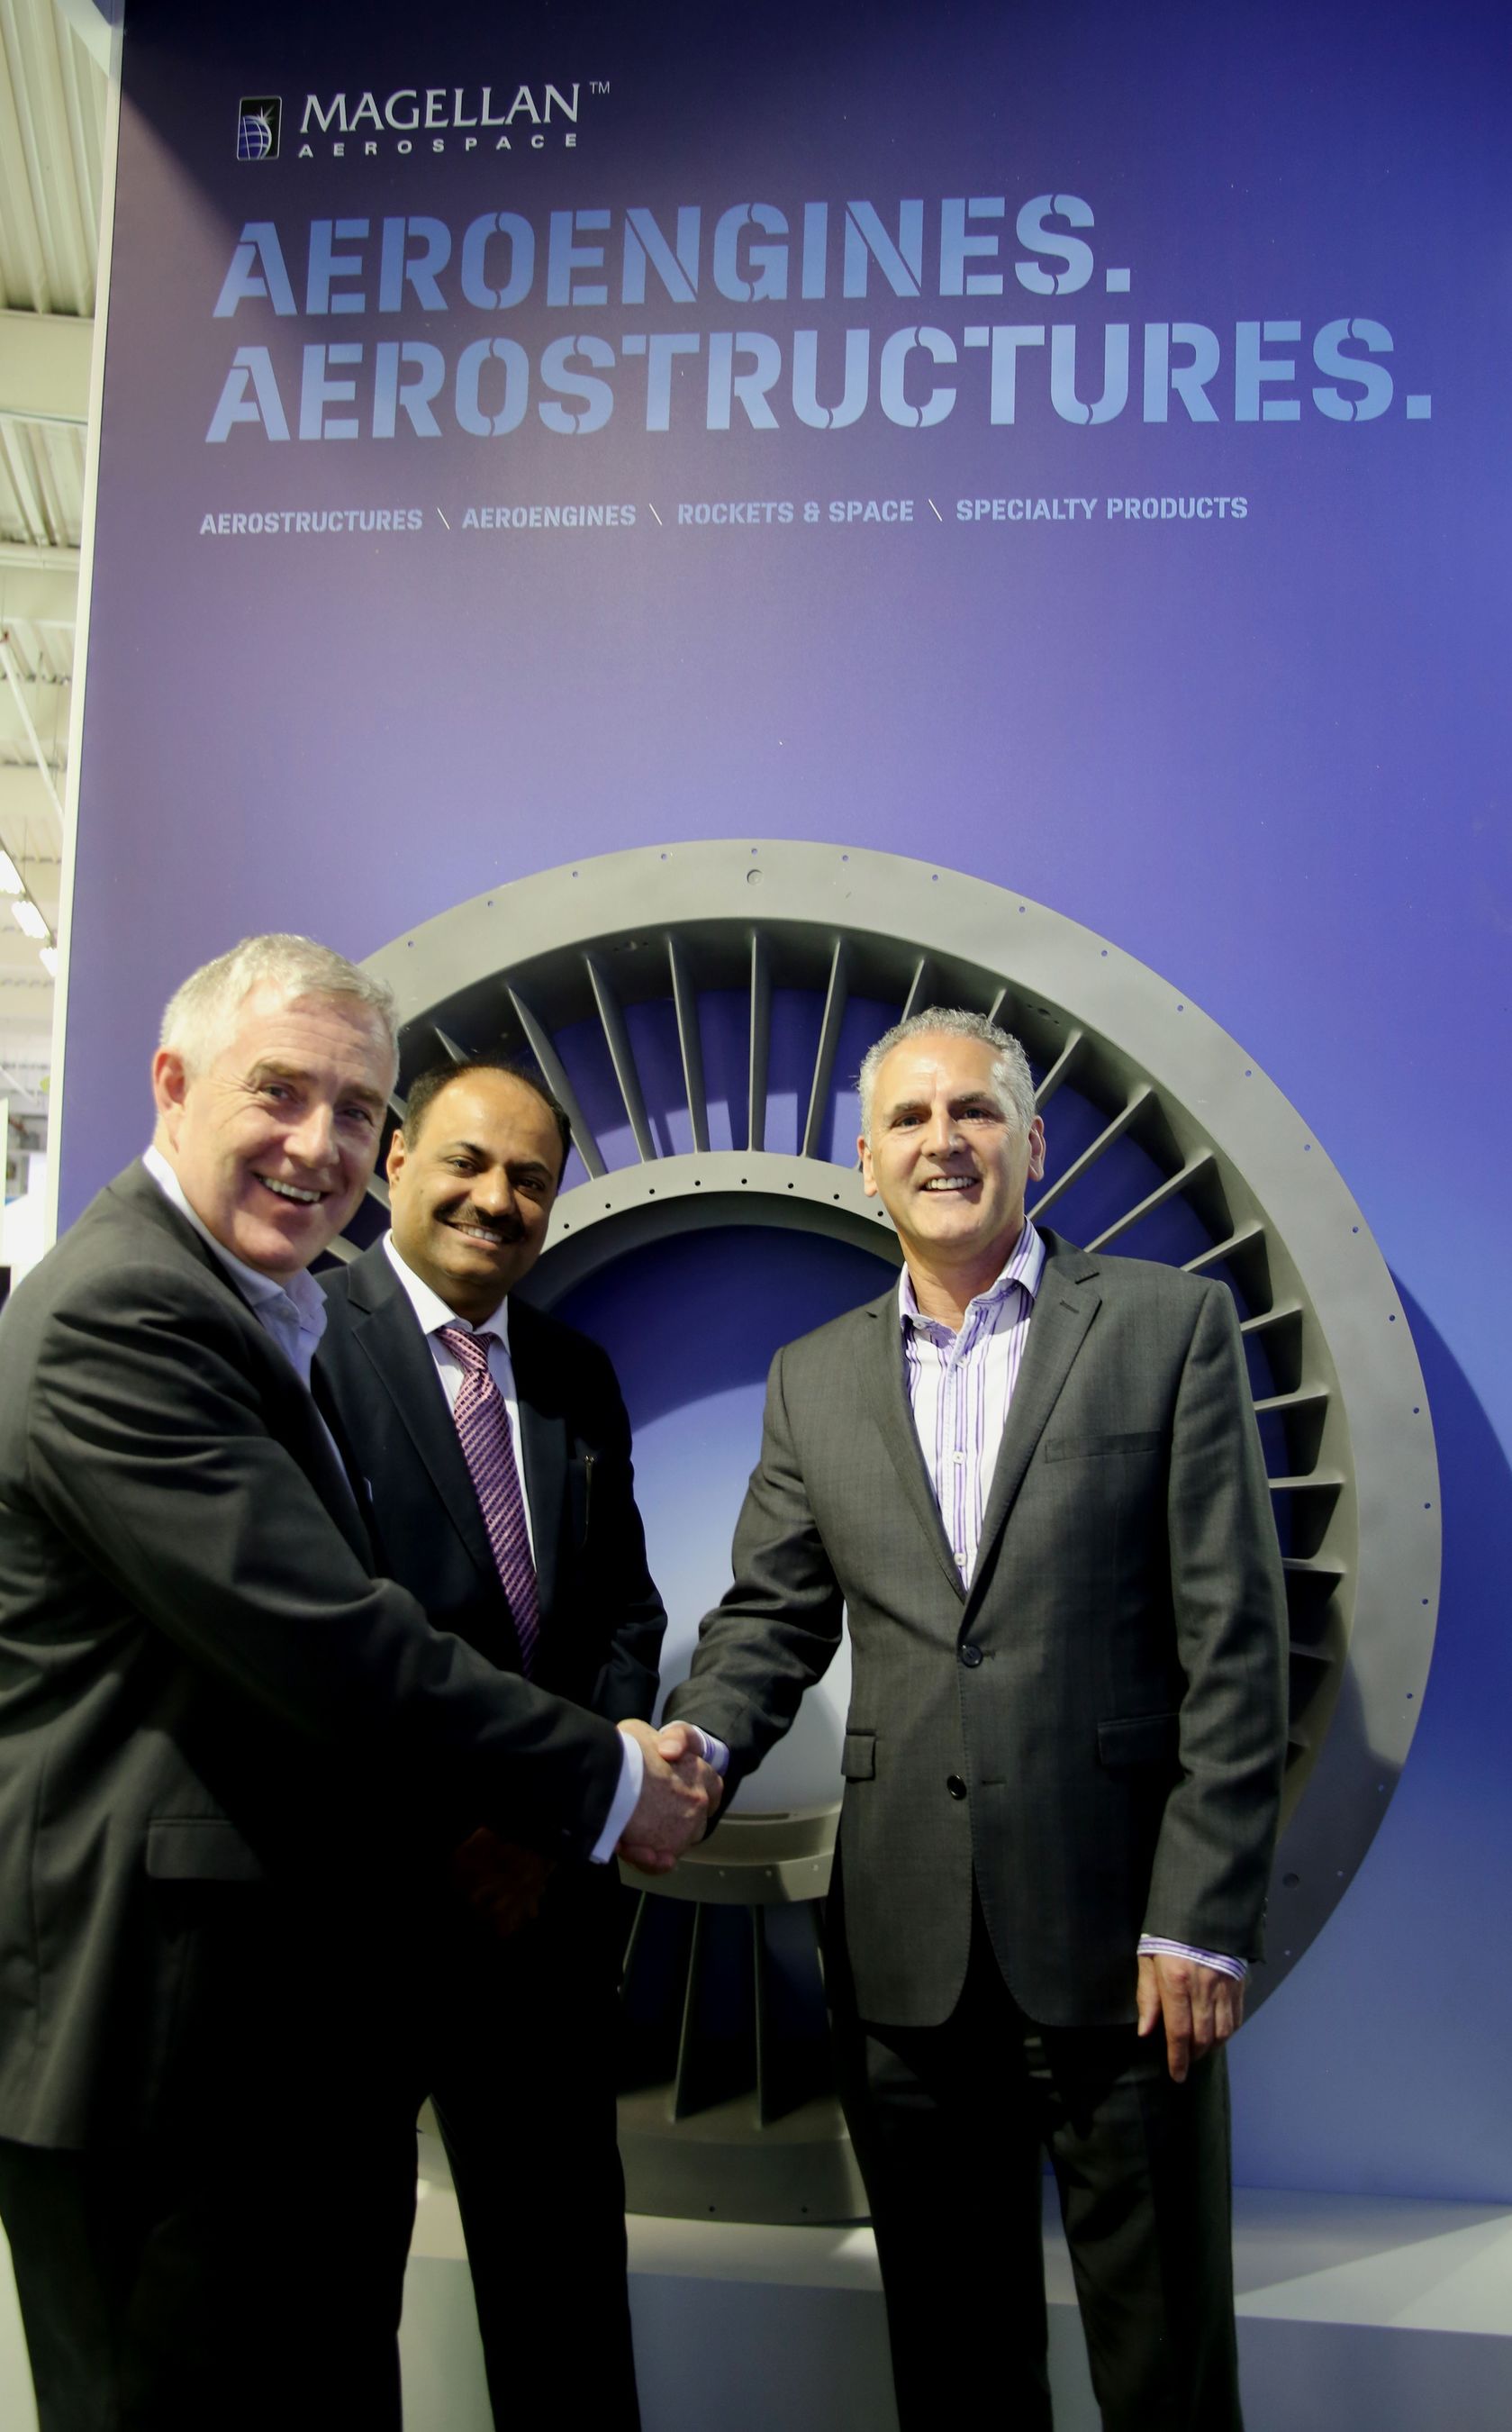 (L-R) Mr. Haydn Martin, Magellanâeuro(TM)s Vice President Business Development, Arvind Mehra, Executive Director and CEO, Mahindra Aerospace and Mr Stephen Roebuck, Mahindraâeuro(TM)s Director, Business Development âeuro" Aerostructures Business, Mahindra Aerospace post signing an Memorandum of Understanding (MOU) to offer their mutual customers major structural assemblies, machined components and fabrications for the global market. (PRNewsFoto/Mahindra & Mahindra Ltd.)